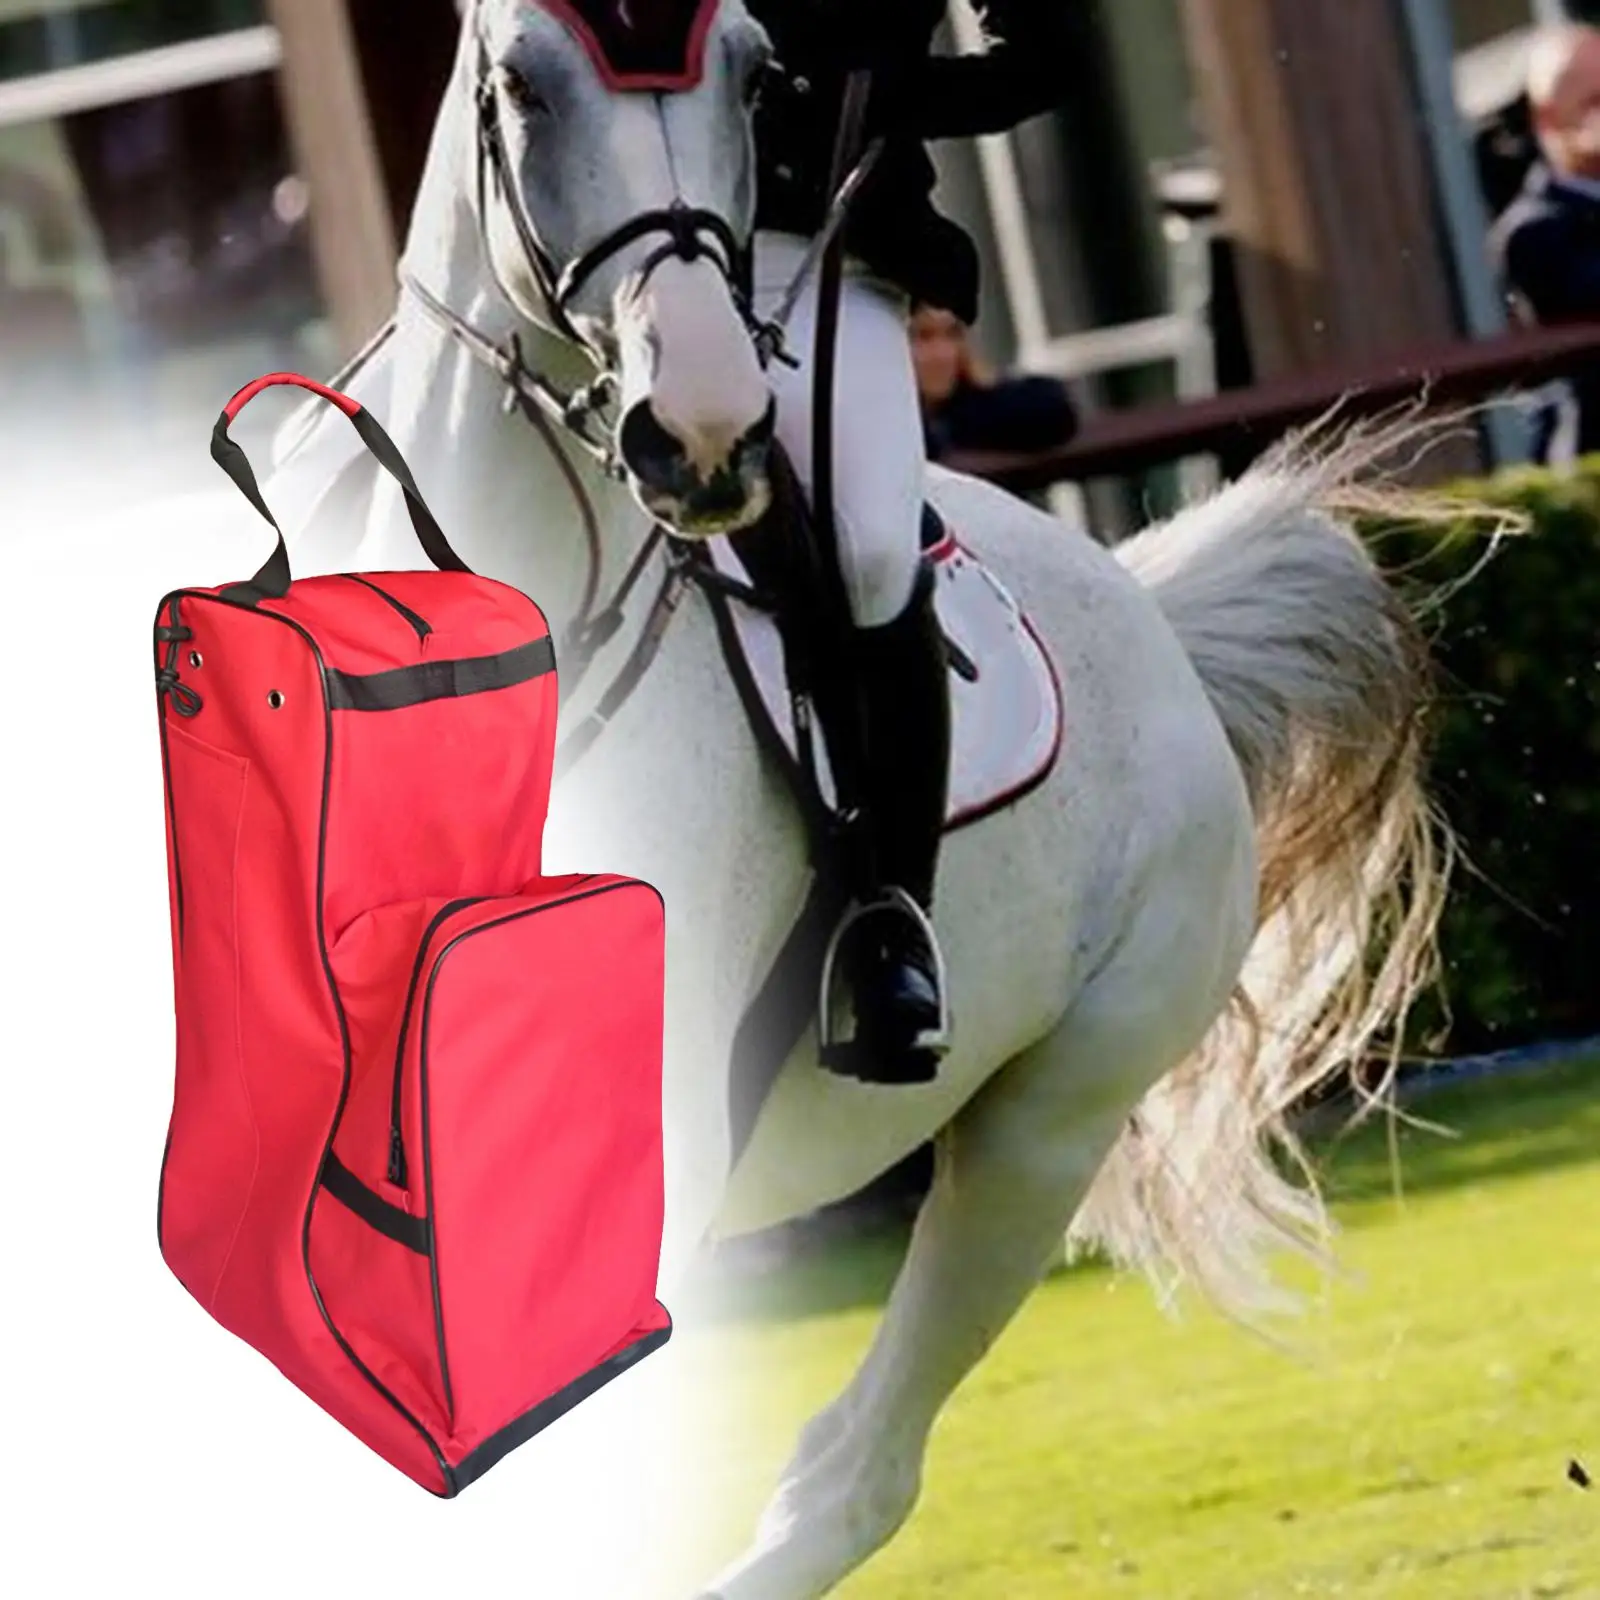 Equestrian Riding Bag Horse Equipment Storage Bag Lightweight Multifunctional Sturdy Convenient Zipper Closure for Camping